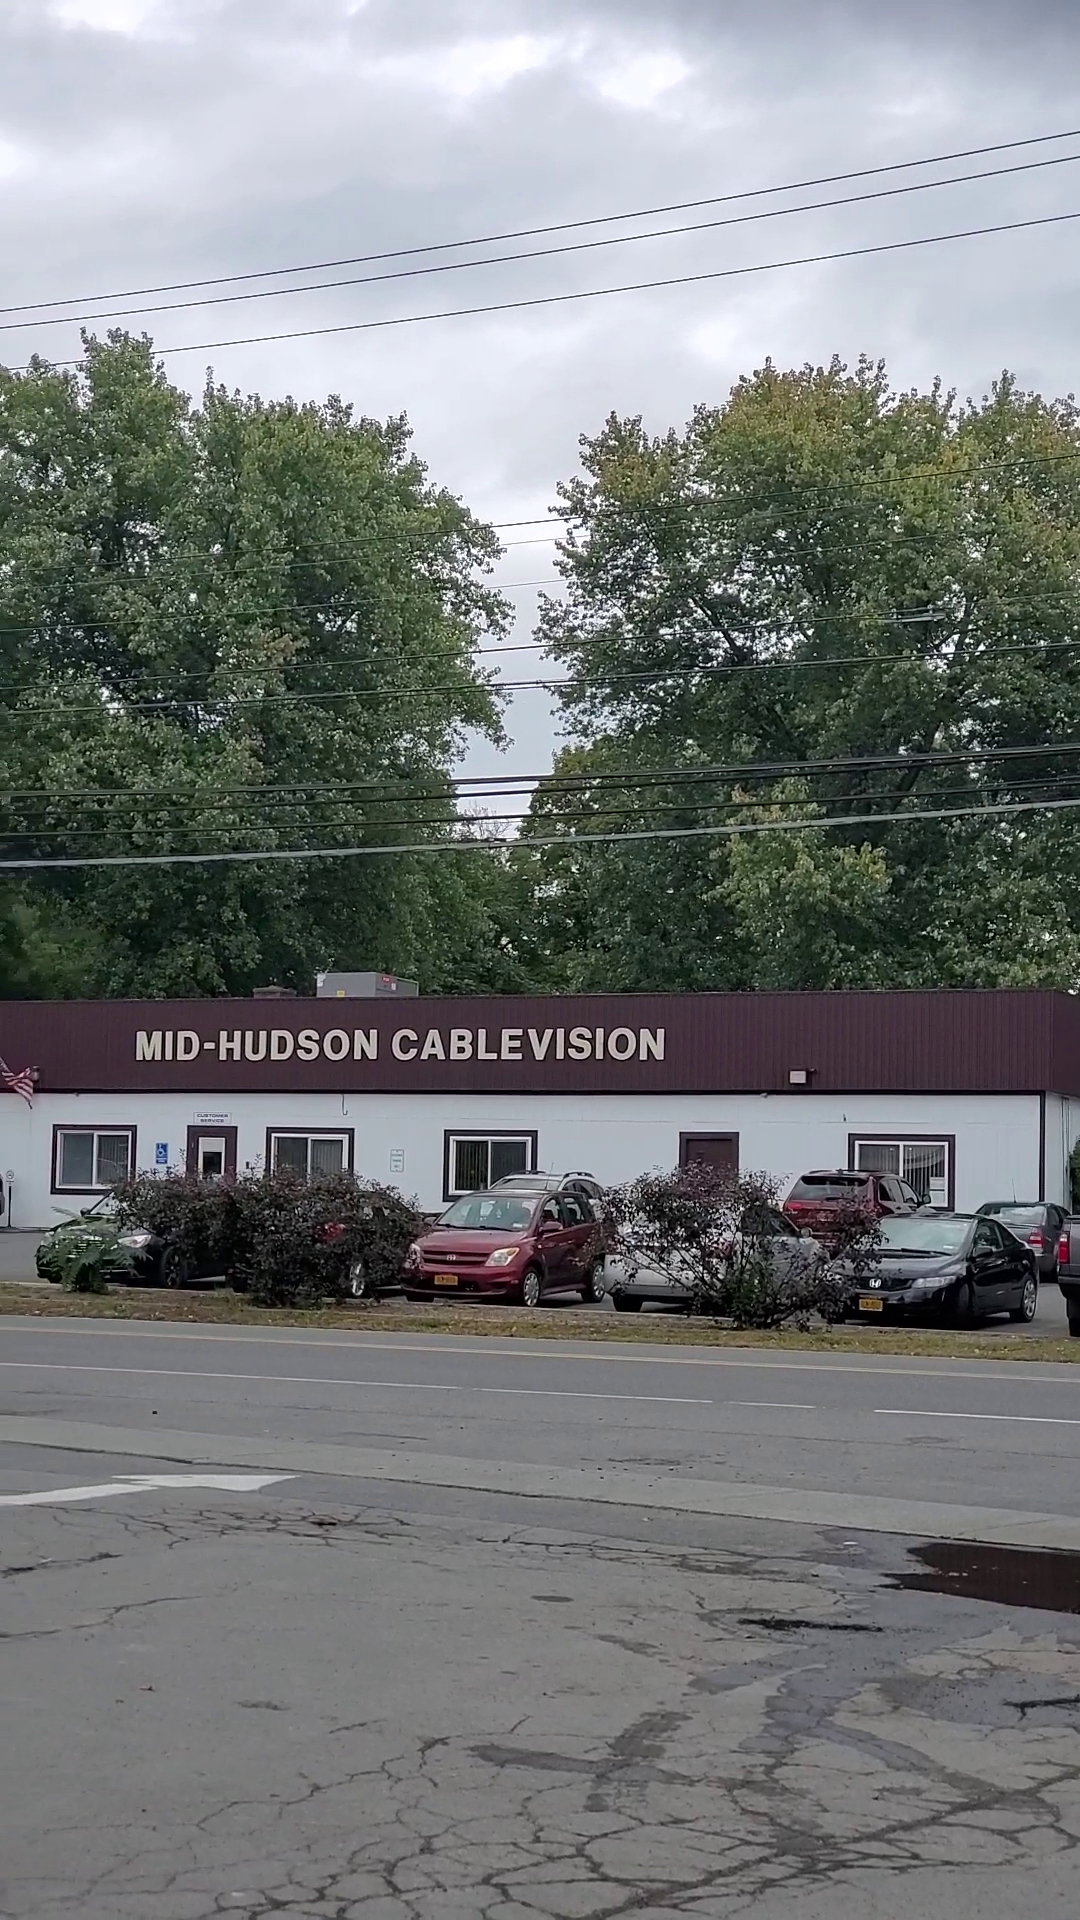 Mid-Hudson Cablevision